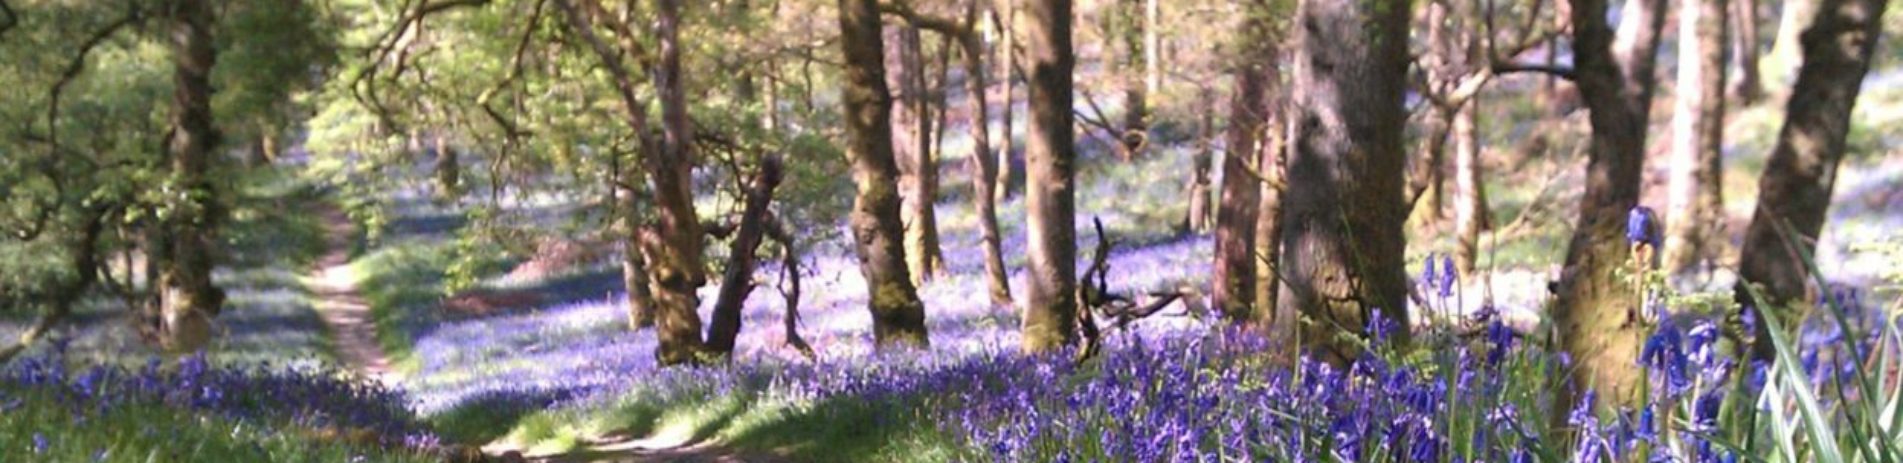 bluebells-in-forest-on-inchcailloch-island-on-loch-lomond